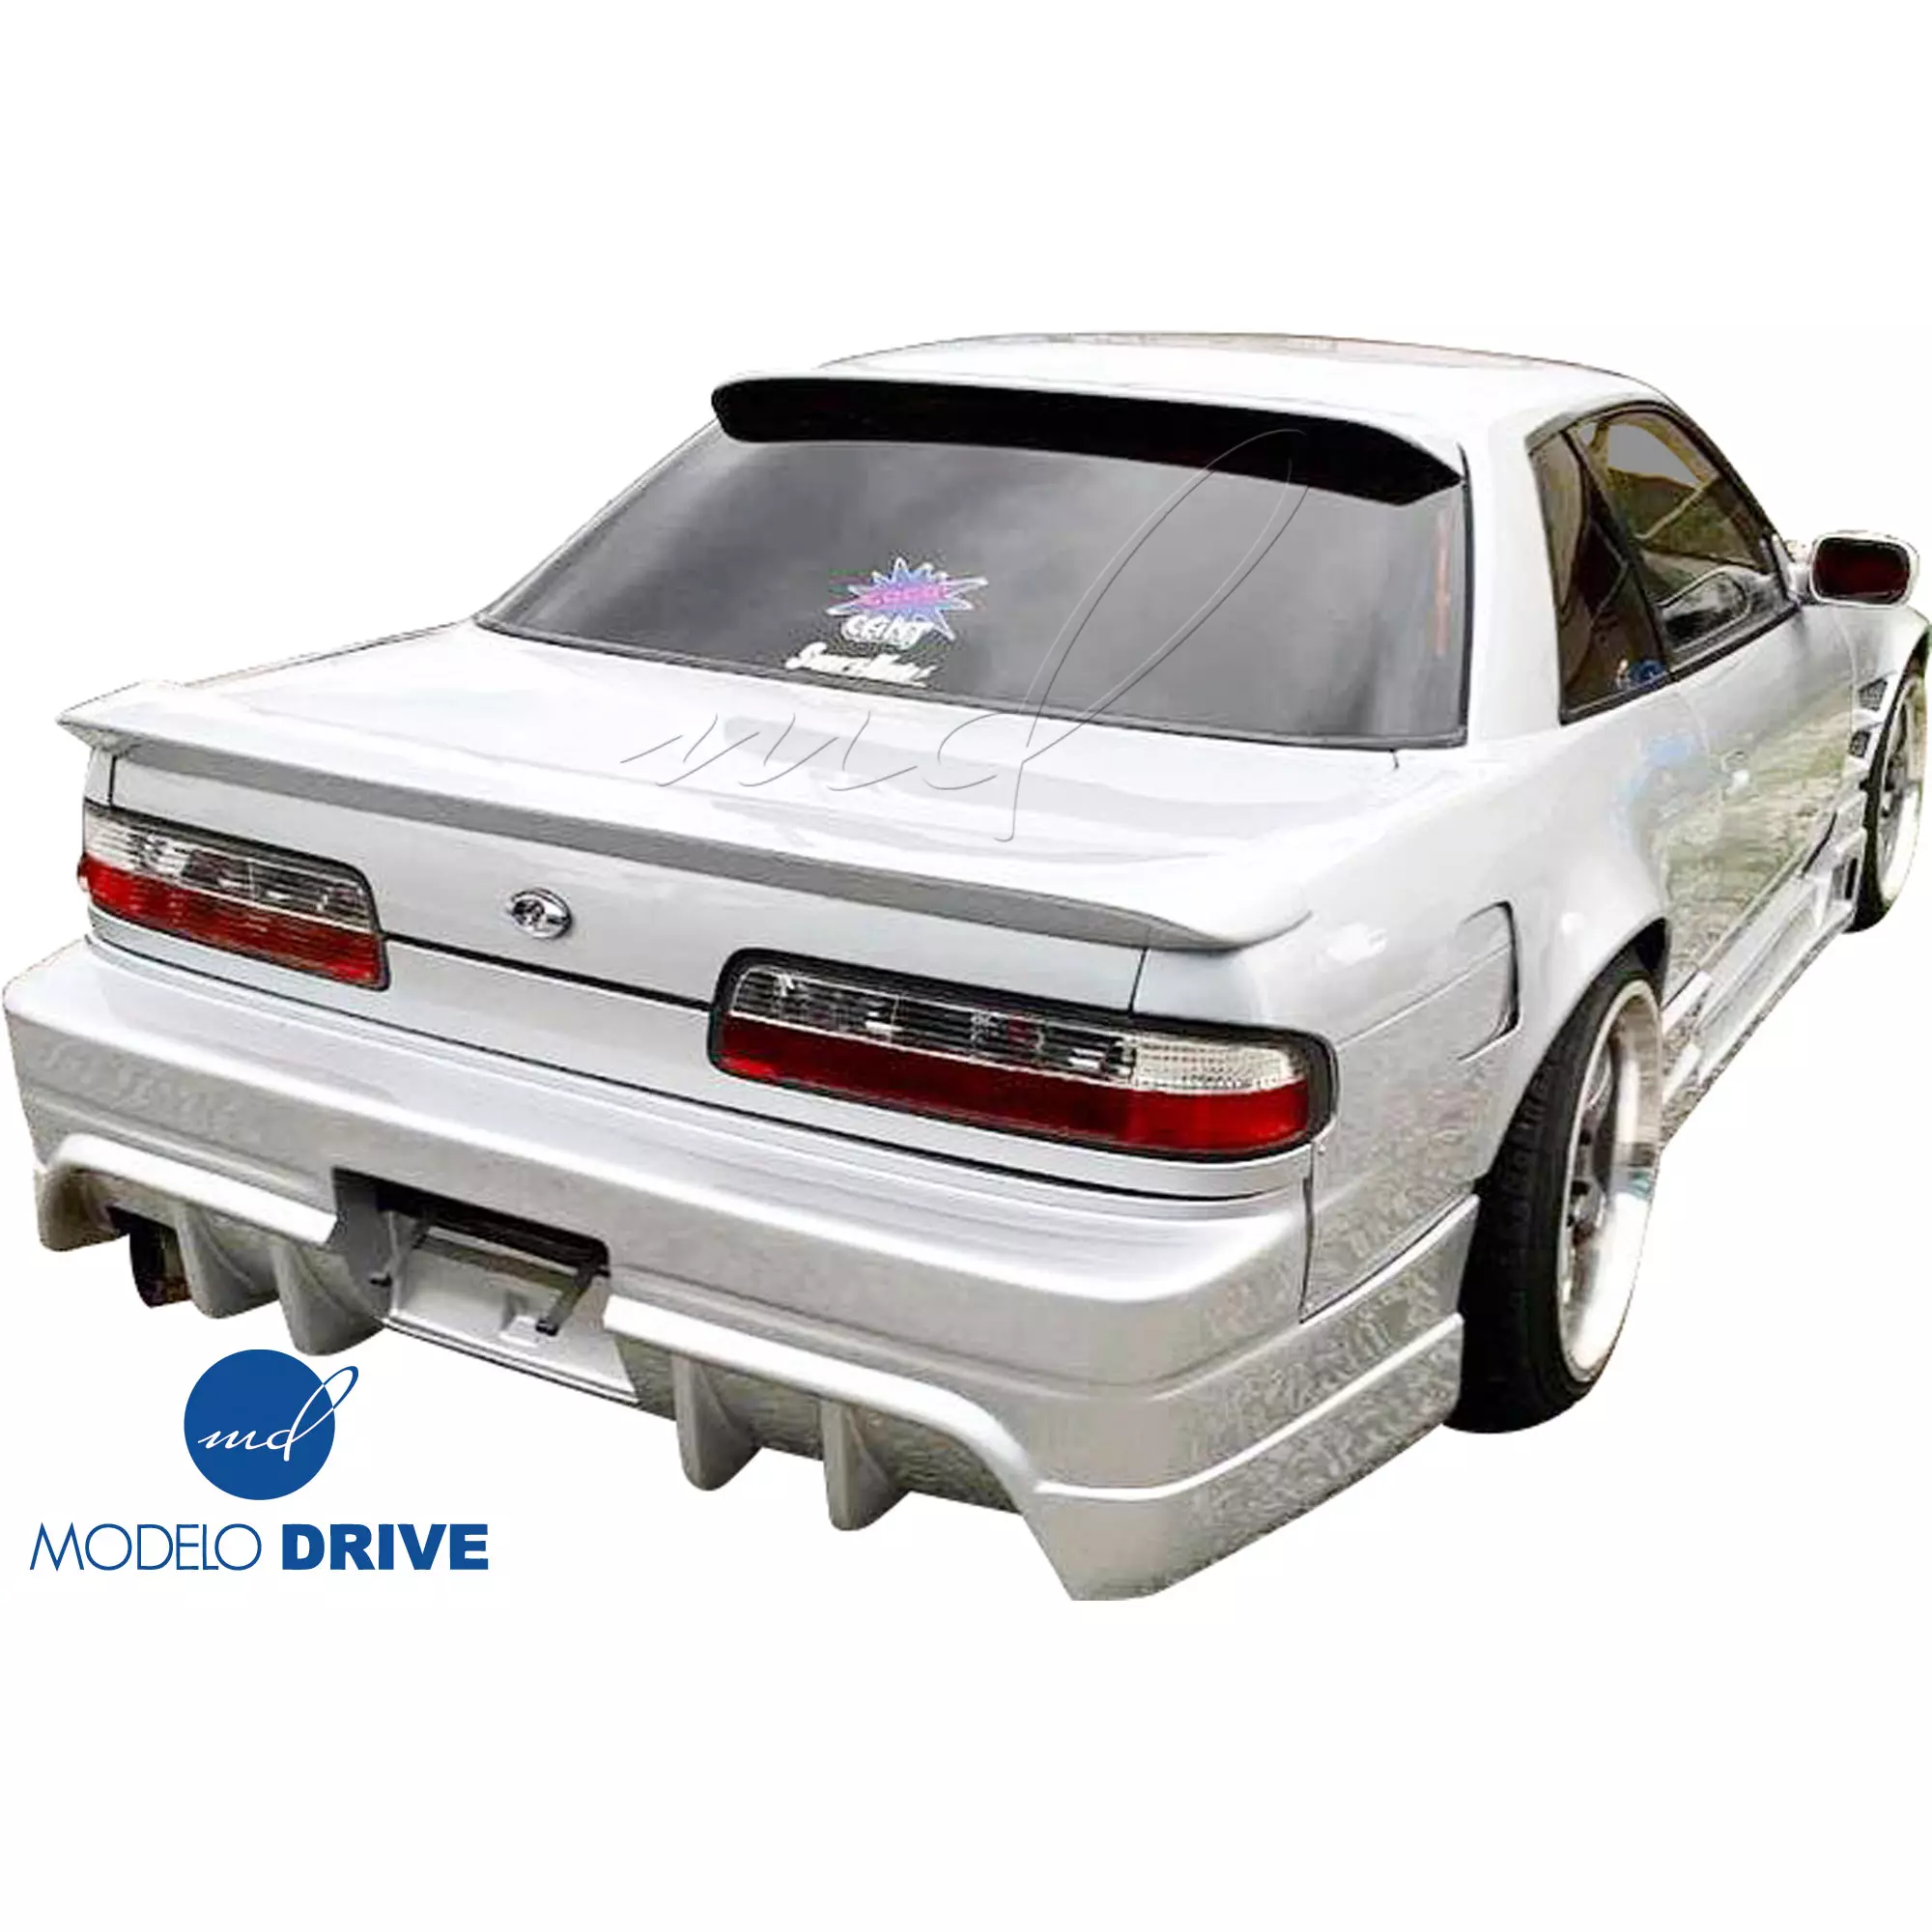 ModeloDrive FRP DMA Trunk Spoiler Wing > Nissan 240SX 1989-1994 > 2dr Coupe - Image 10